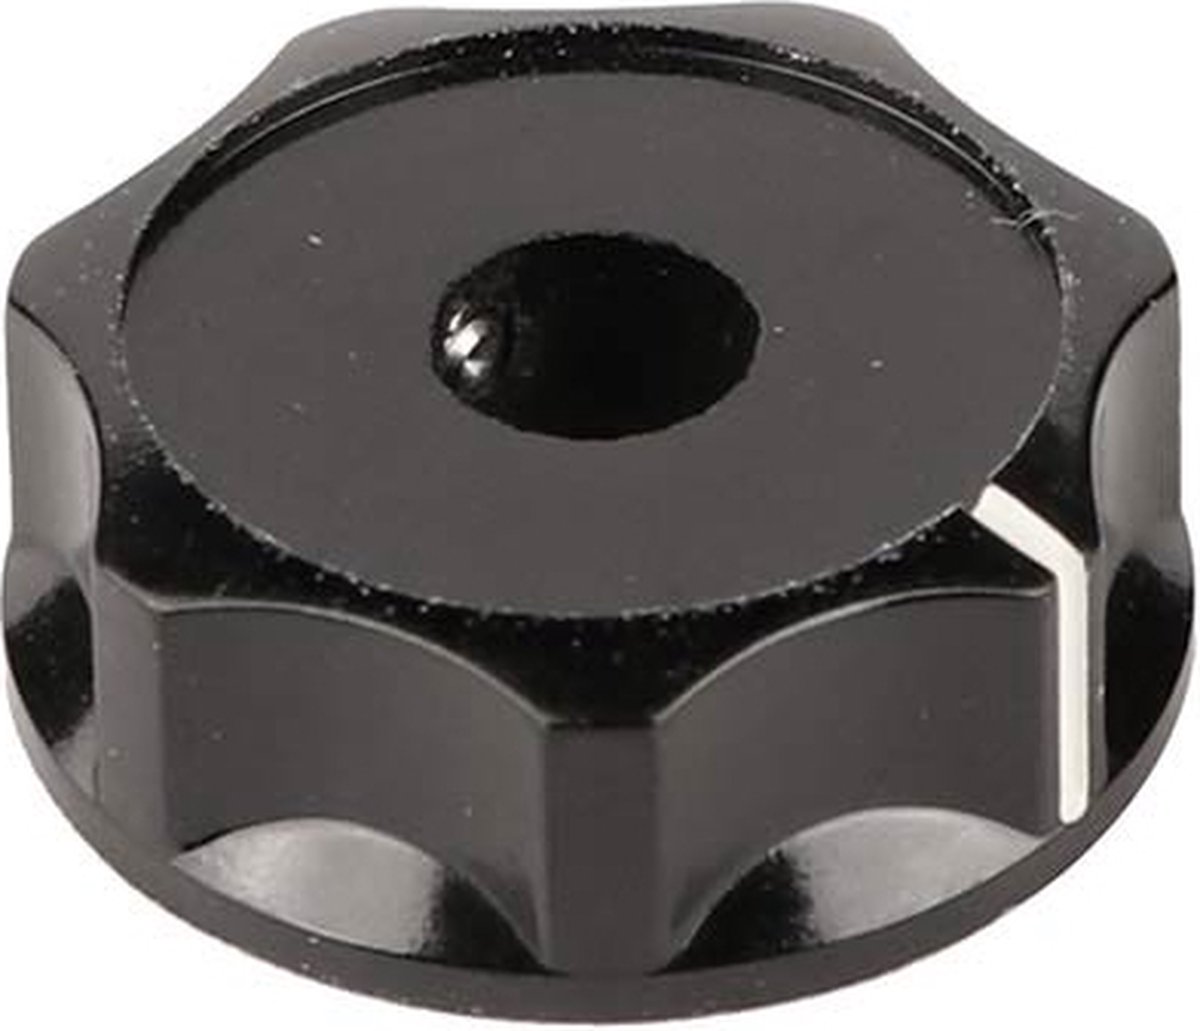 lower knob for Deluxe Jazz Bass®, black